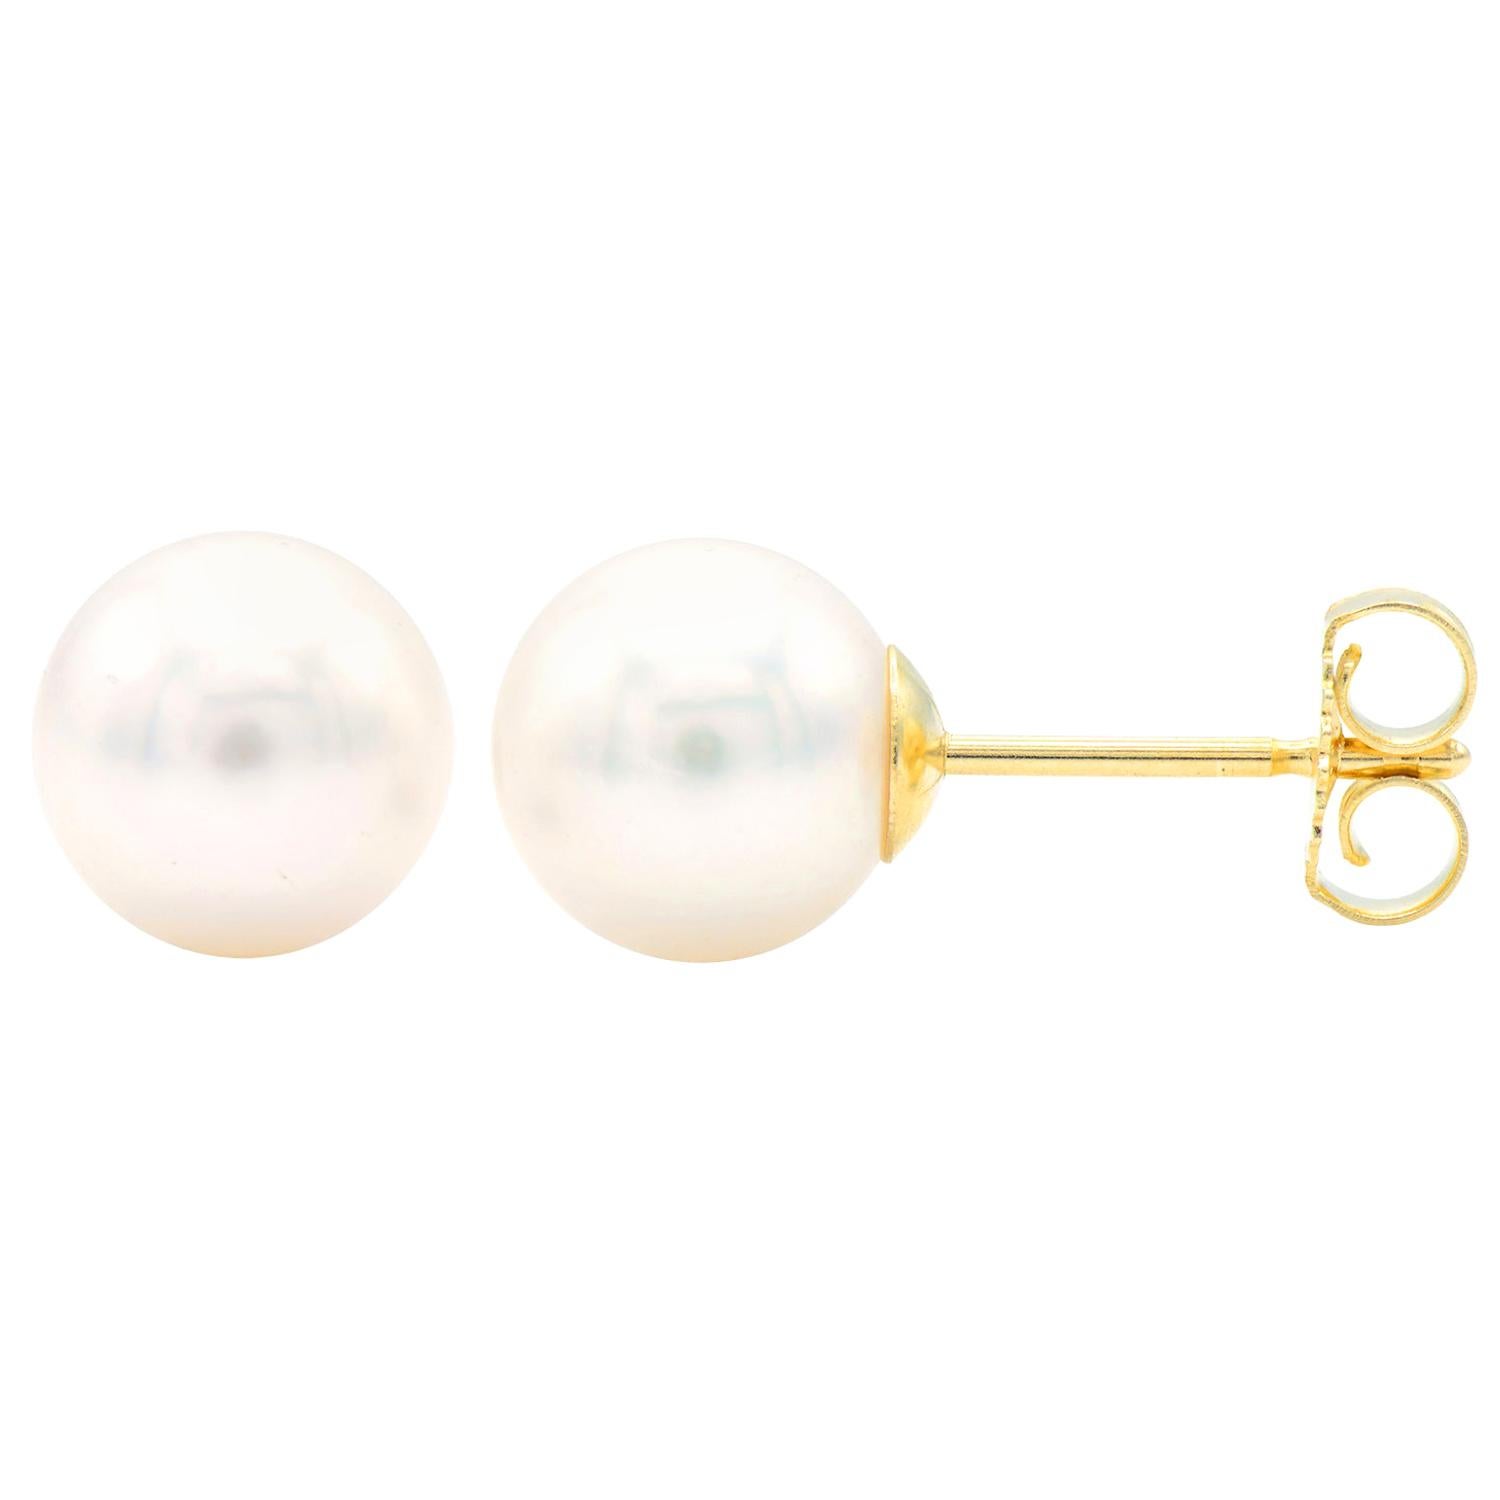 7.5-8mm Cultured Pearl Stud Earrings with 14 Karat Yellow Gold Posts and Backs